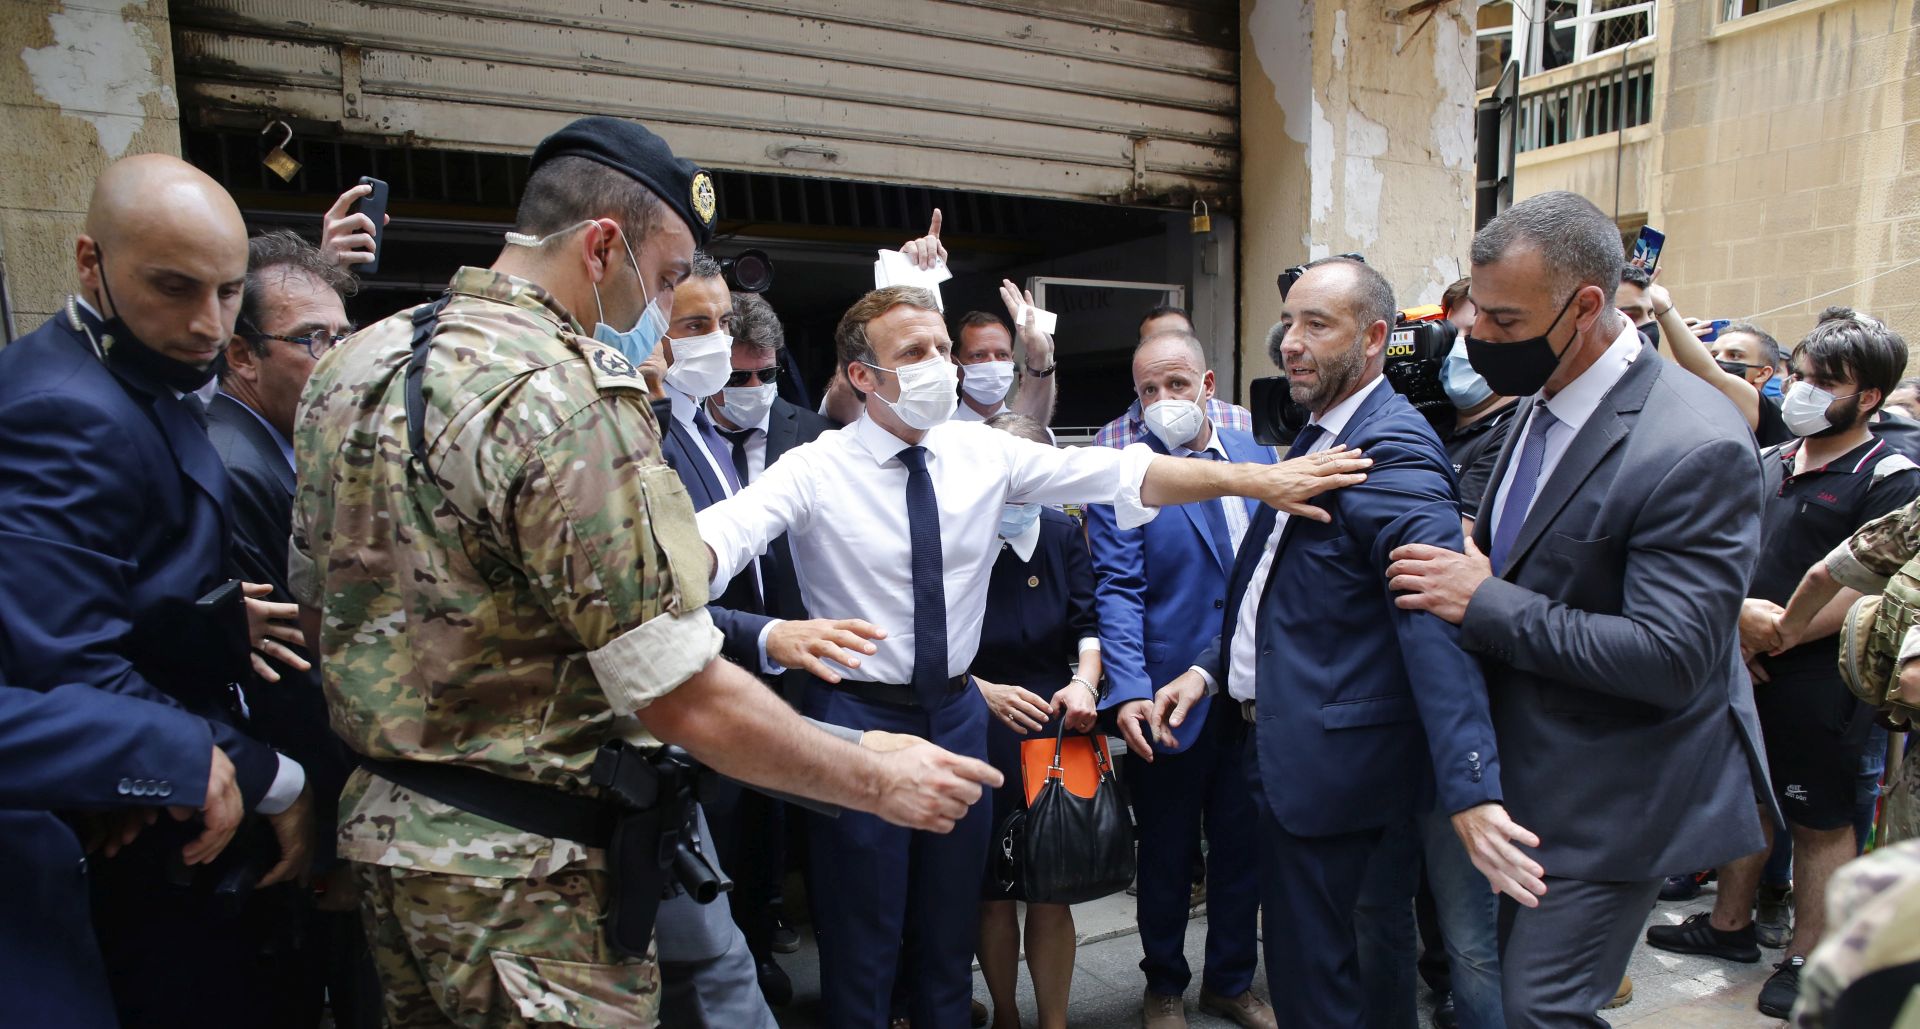 epa08587266 French President Emmanuel Macron gestures as he visits a devastated street of Beirut, Lebanon, 06 August 2020. Macron arrived to Lebanon to show support after a massive explosion on 04 August in which at least 135 people were killed, and more than 5,000 injured in what believed to have been caused by an estimated 2,750 of ammonium nitrate stored in a warehouse.  EPA/Thibault Camus / POOL MAXPPP OUT